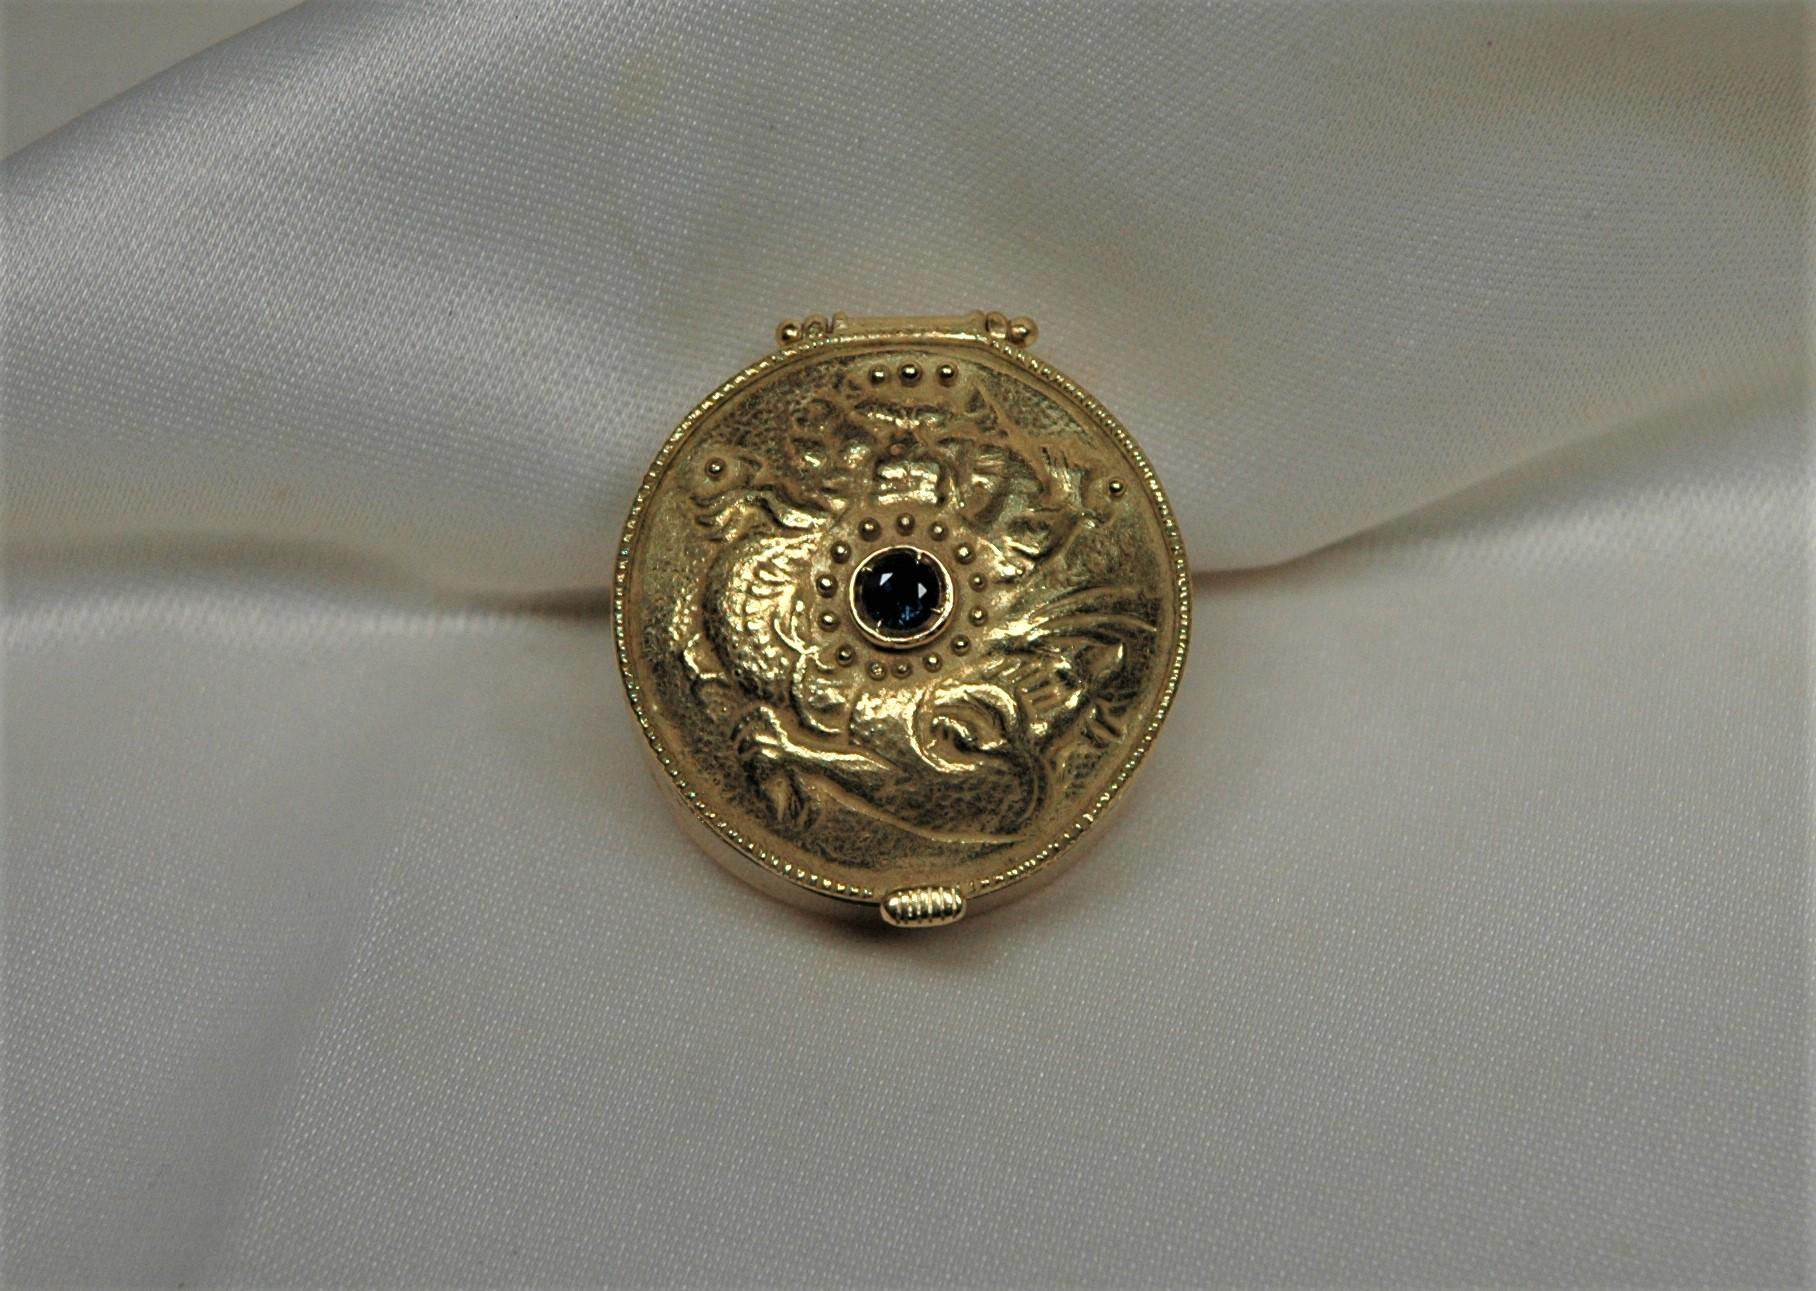 Hand-crafted gold box with blue sapphire embedded in the center.